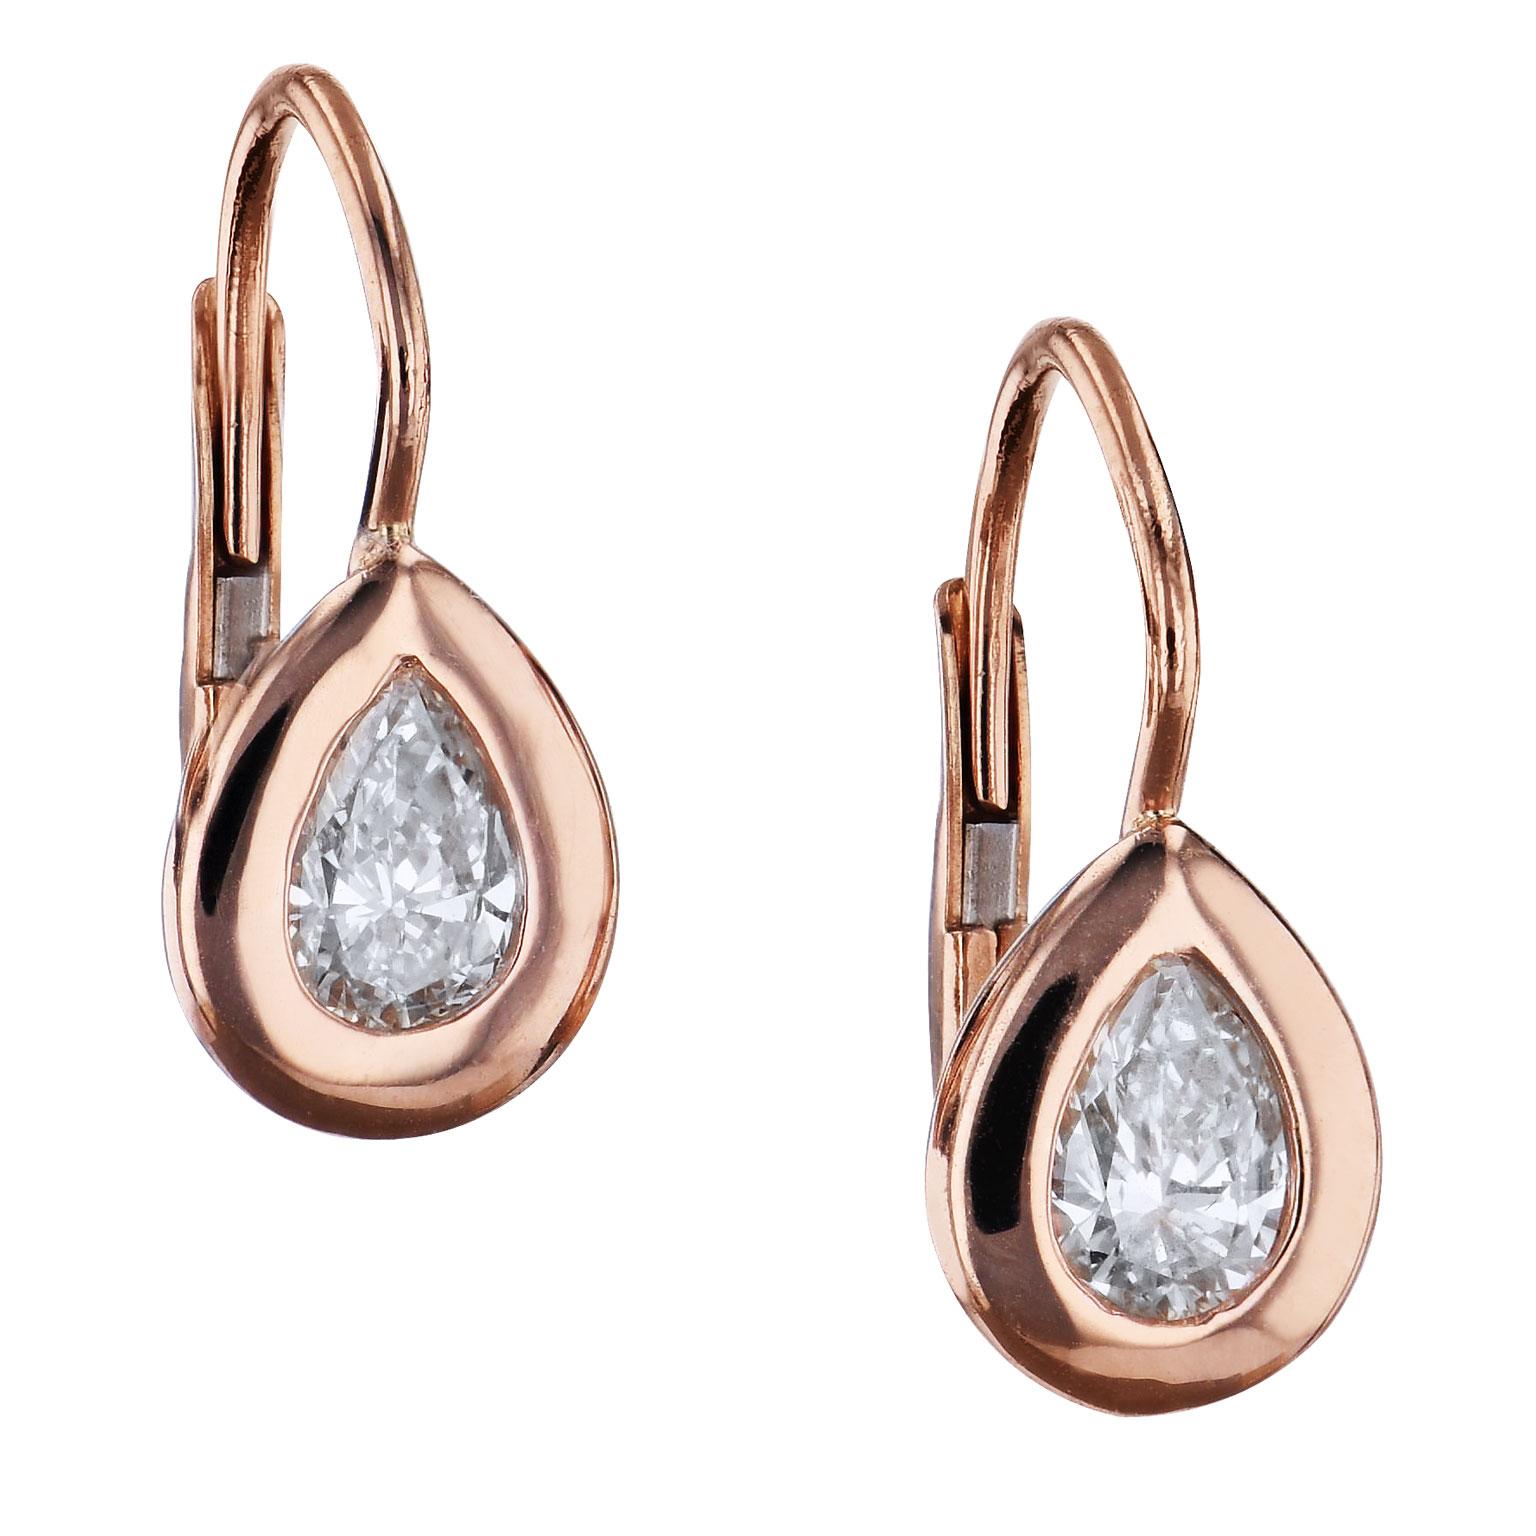 0.57 Carat Pear-Shaped Diamond 18 karat Rose Gold Lever-Back Earrings Handmade

The hardness and strength of diamond merge with the warmth and softness of 18 karat rose gold to create a pair of eye-catching handmade lever-back earrings. Two